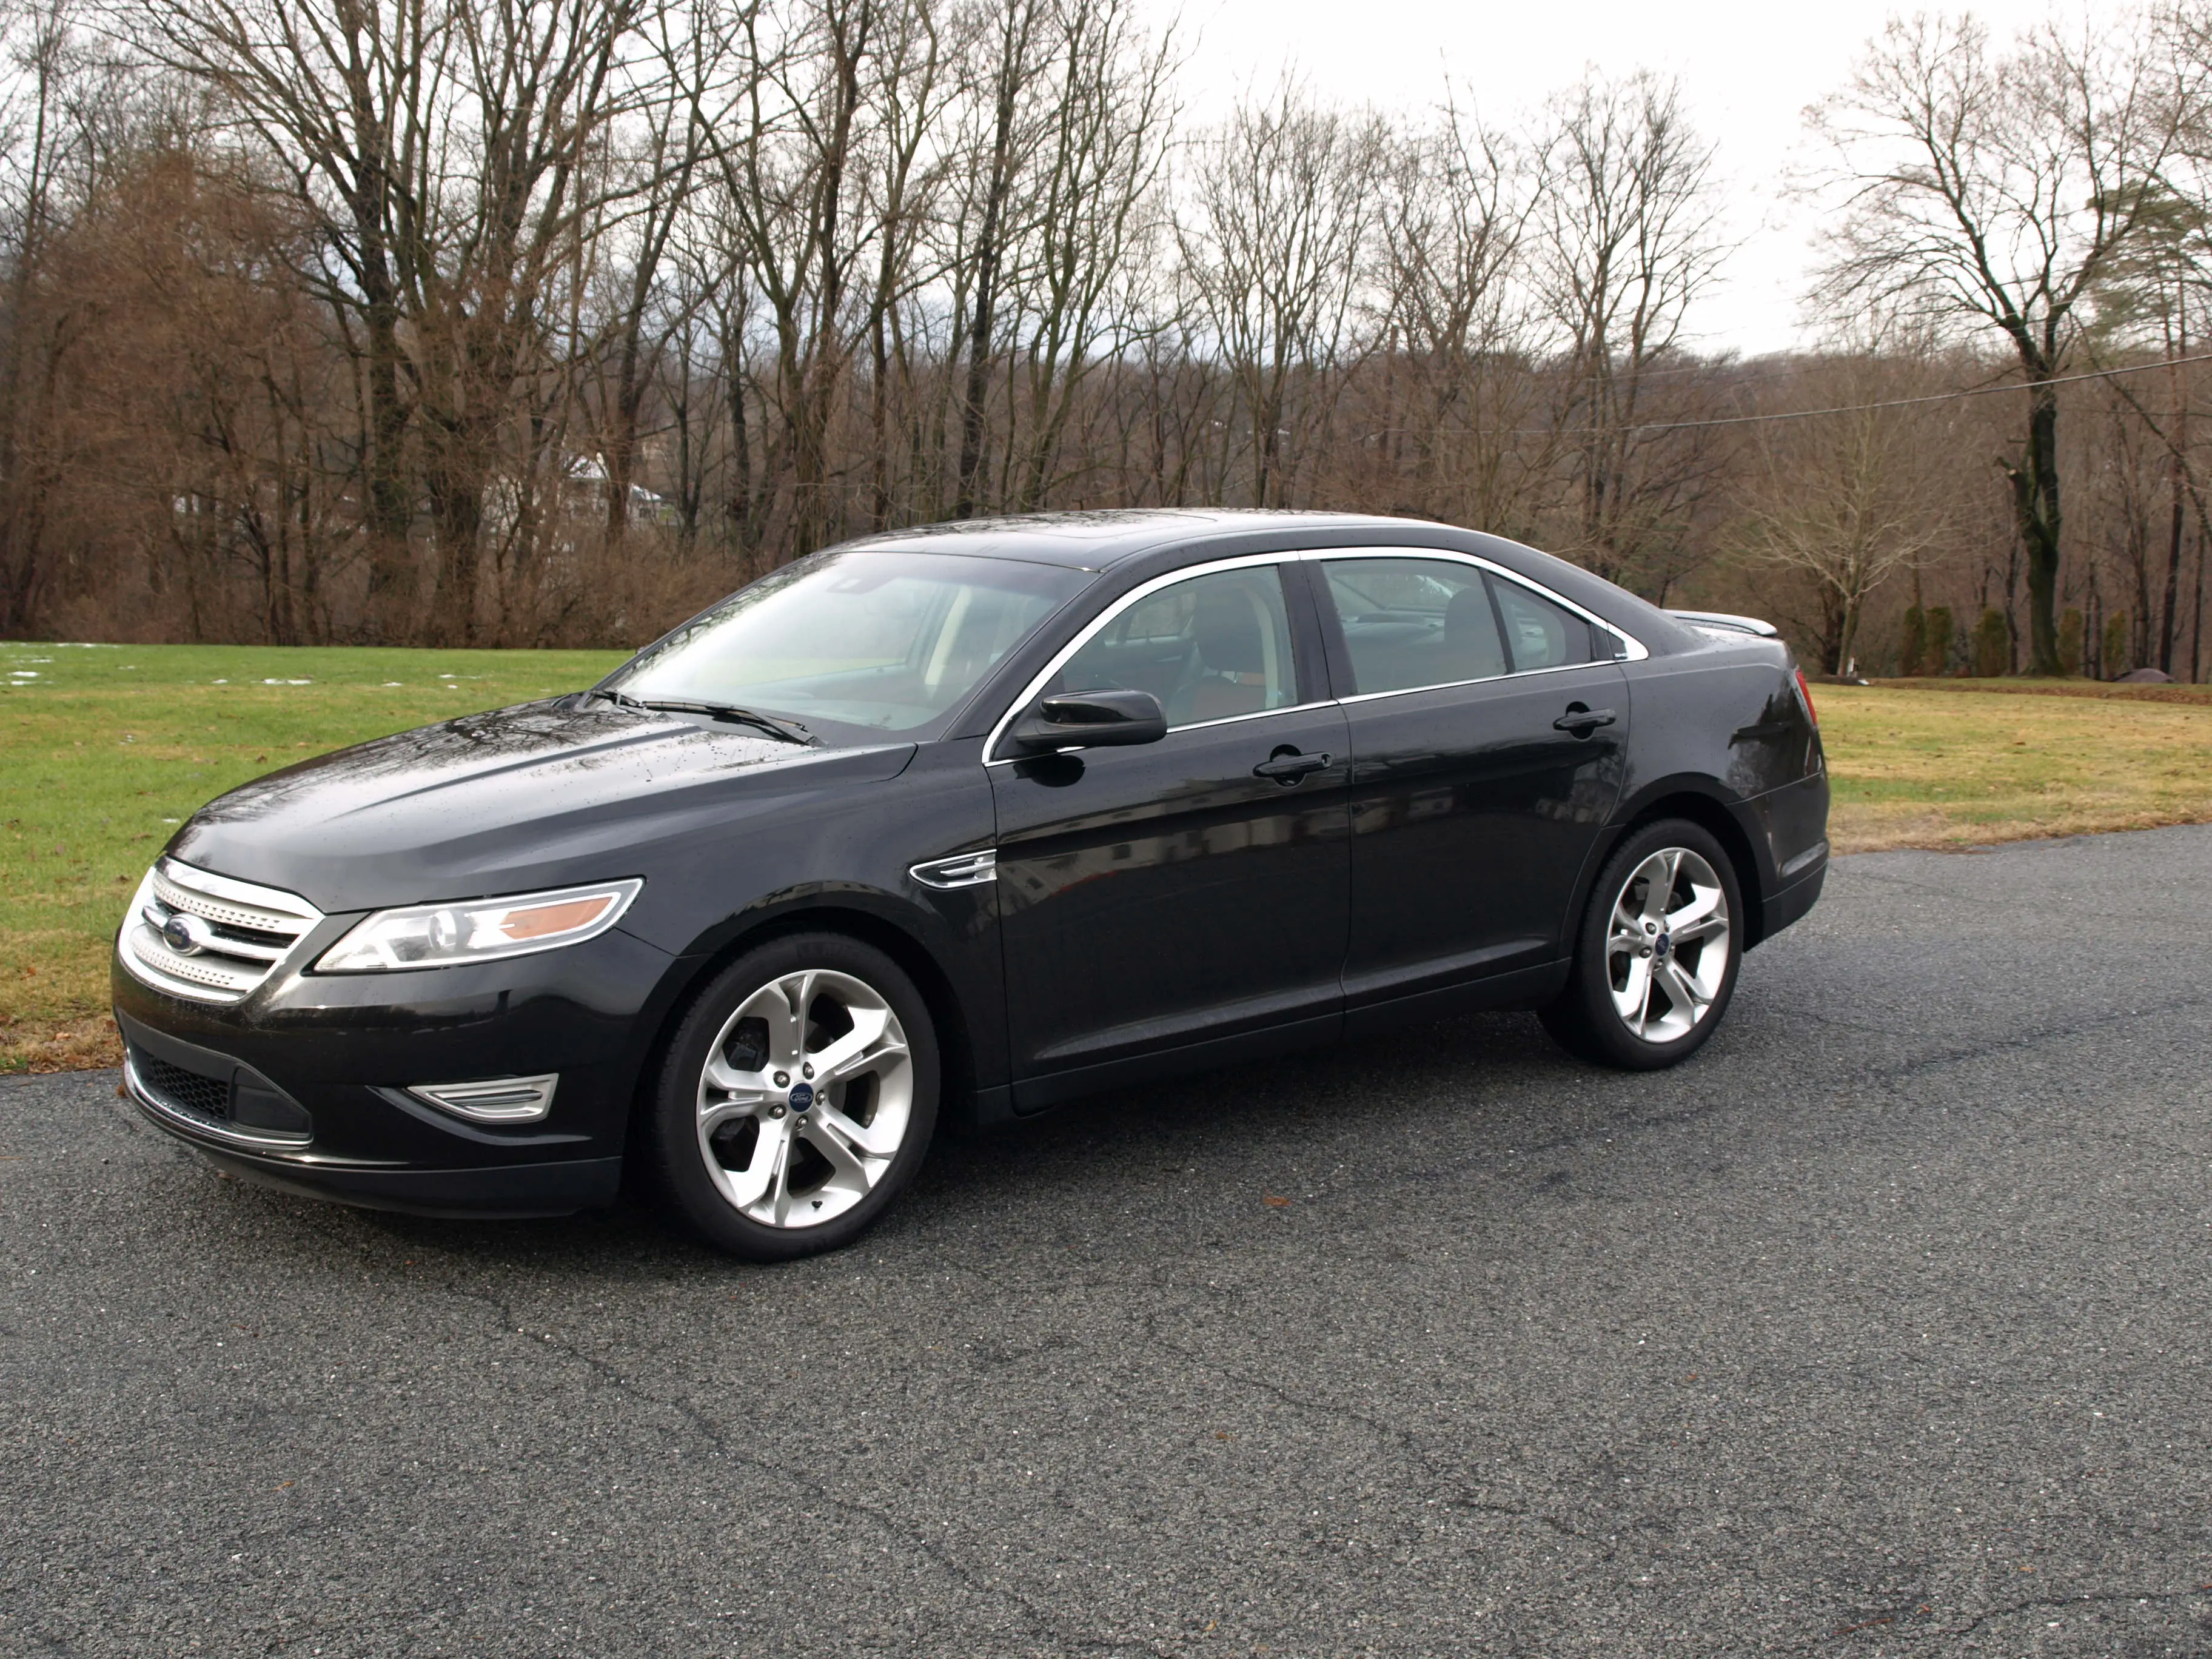 What is the gas mileage for a 2010 ford taurus #2